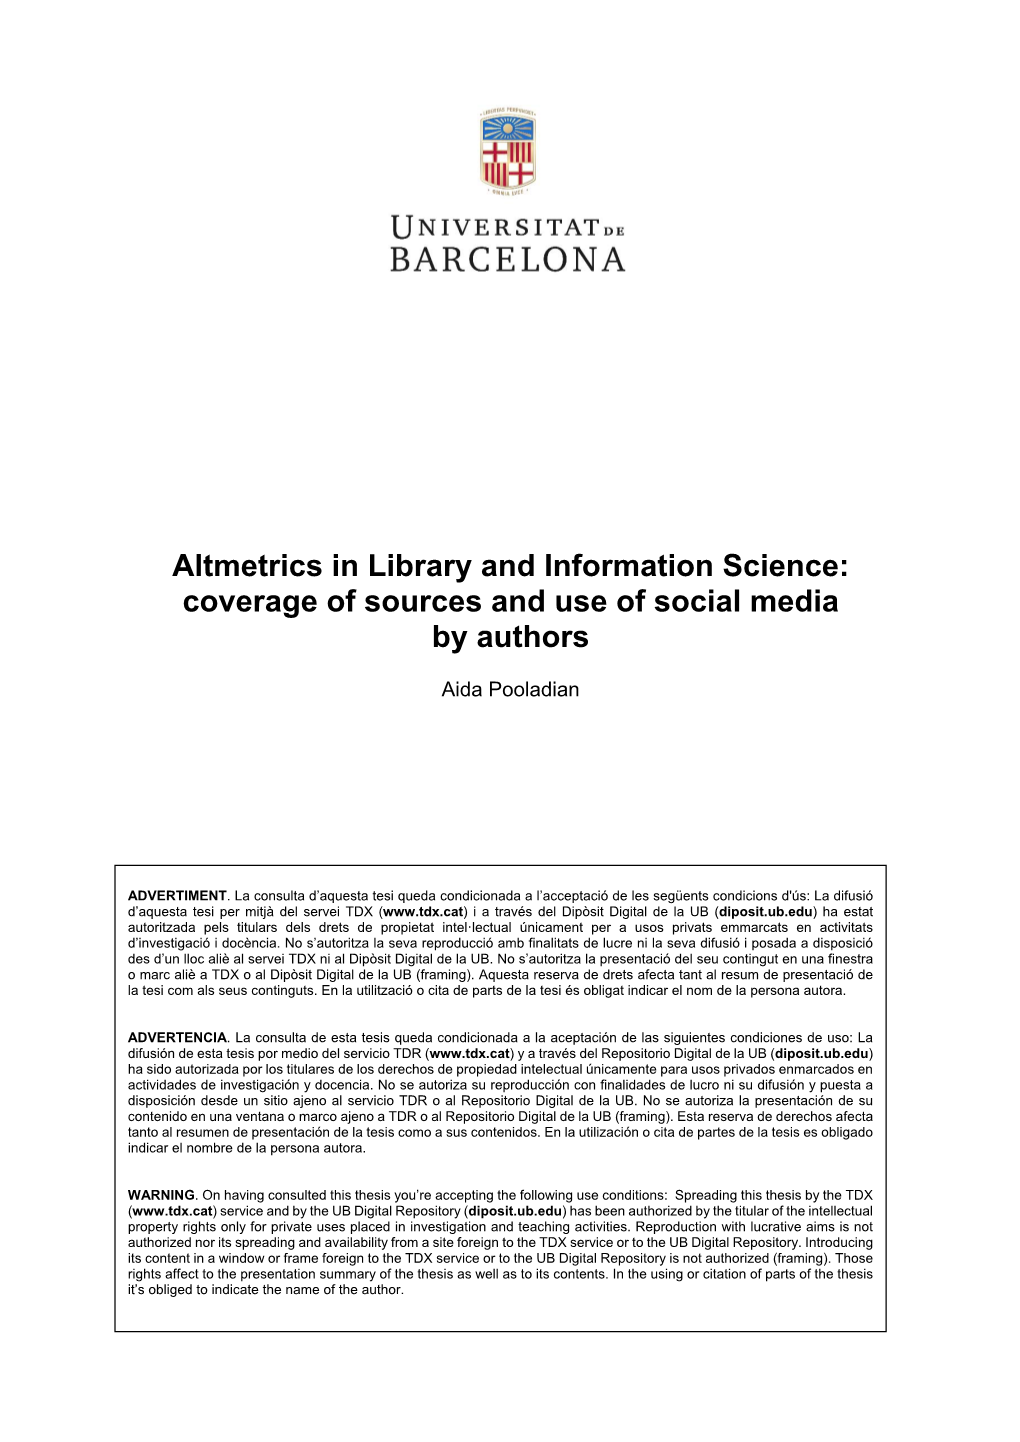 Altmetrics in Library and Information Science: Coverage of Sources and Use of Social Media by Authors